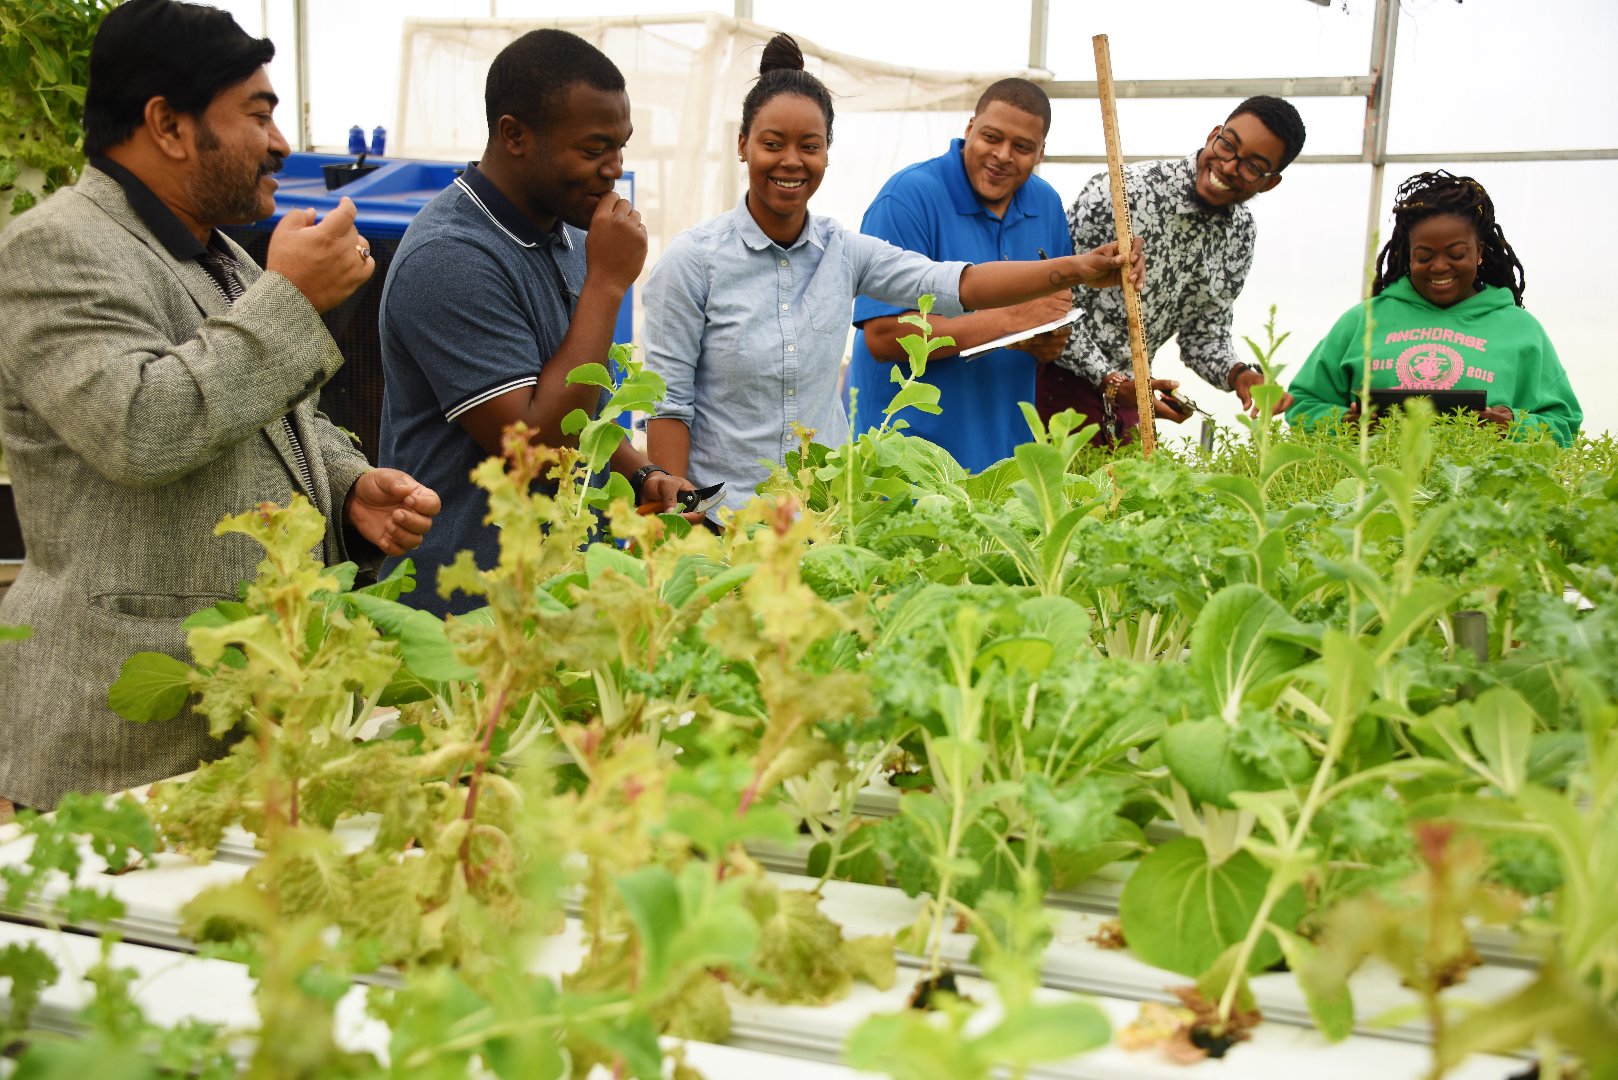 Biswas (far left) and Samuels (third from right) teach students in the biotechnology graduate program how to grow crops using various hydroponic systems.